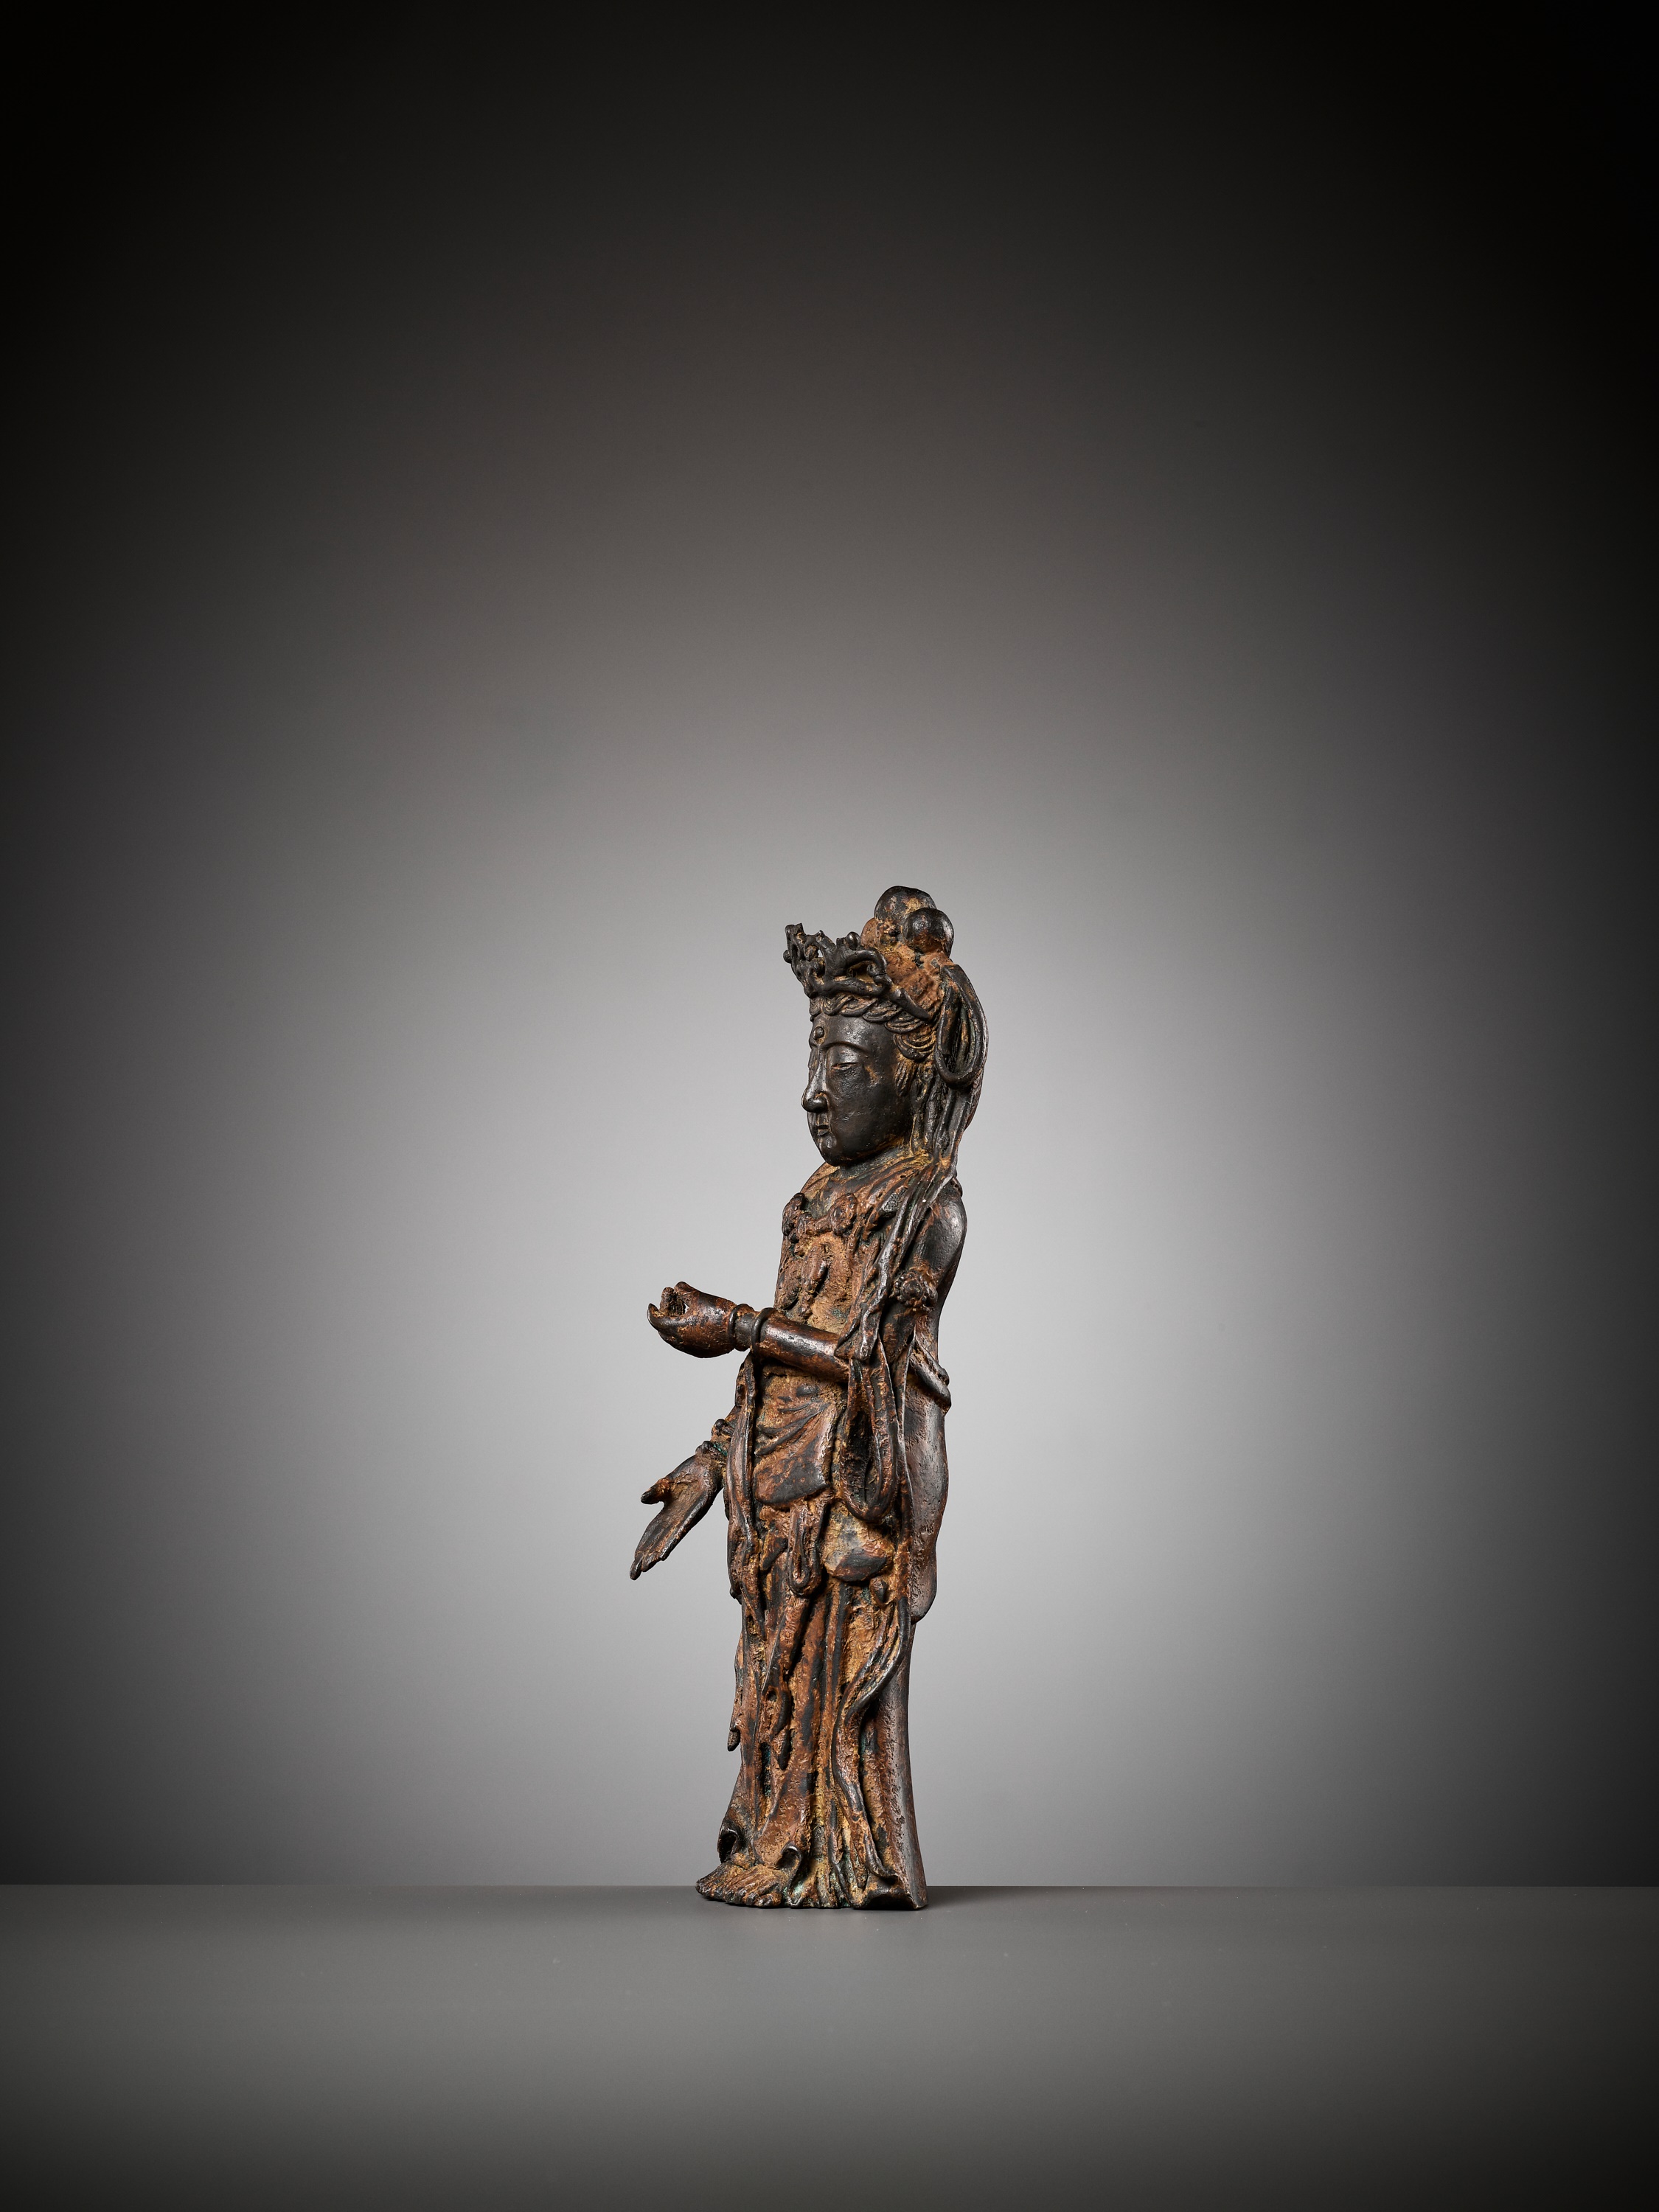 AN EXCEEDINGLY RARE BRONZE FIGURE OF GUANYIN, DALI KINGDOM, 12TH - MID-13TH CENTURY - Image 17 of 20